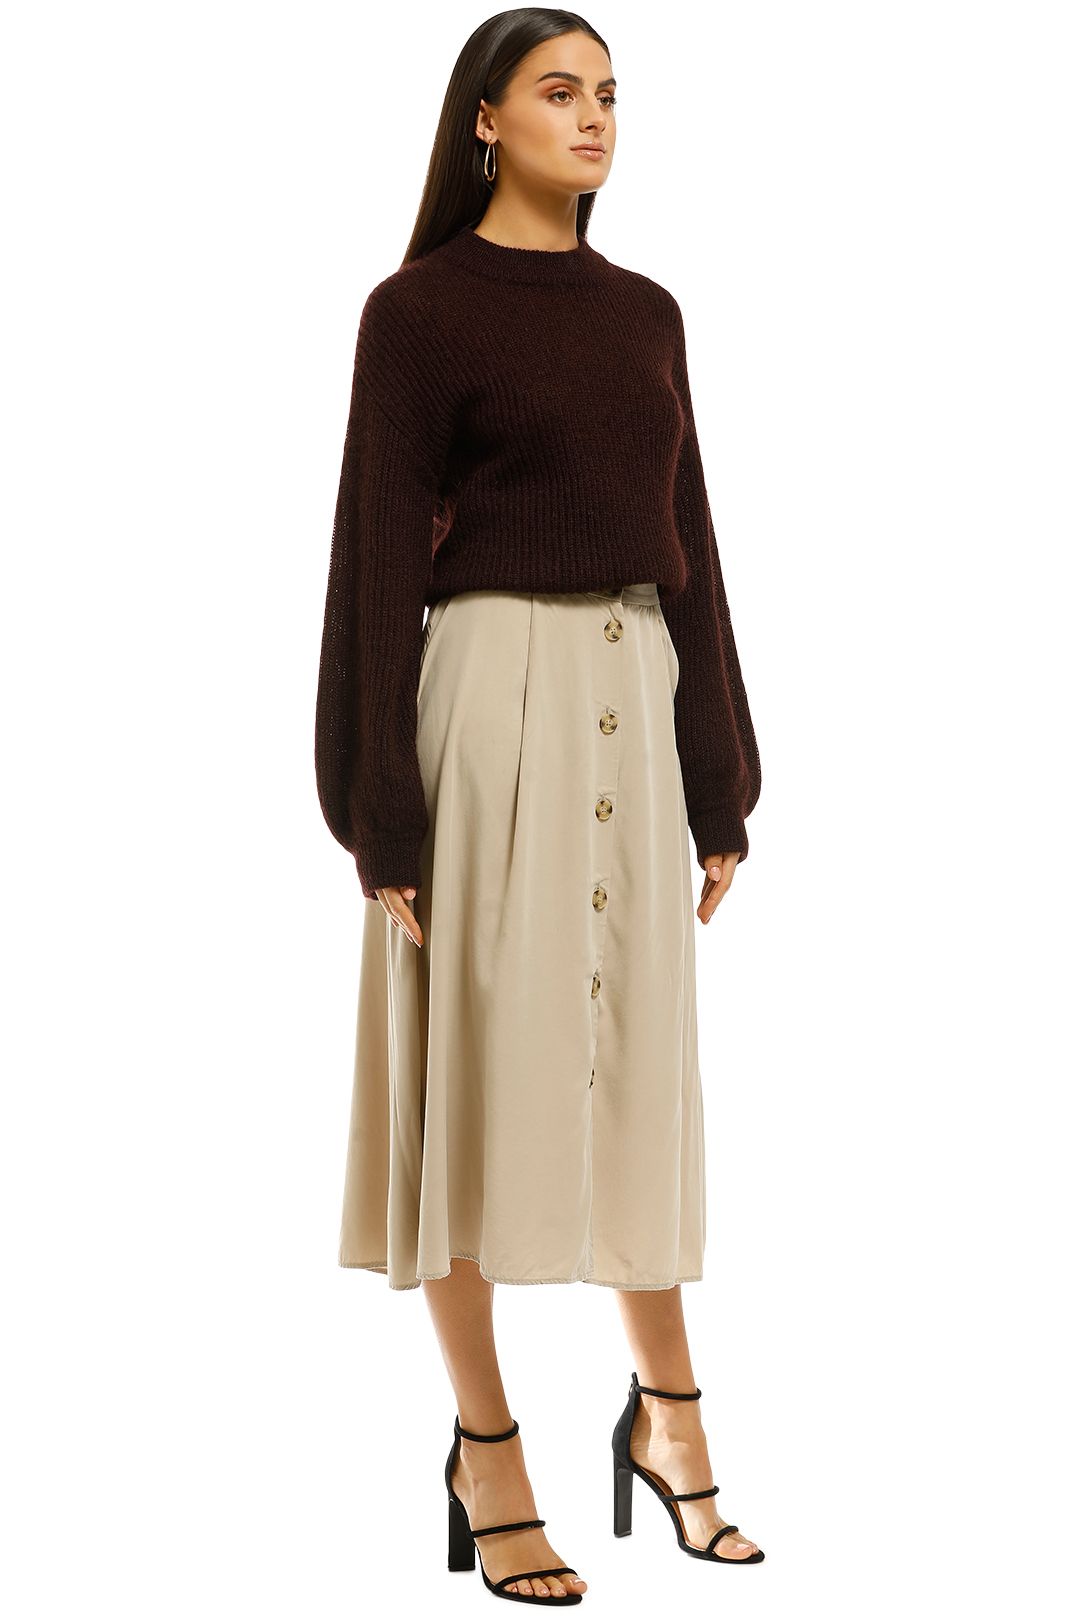 MNG - Buttoned Midi Skirt - Ivory - Side